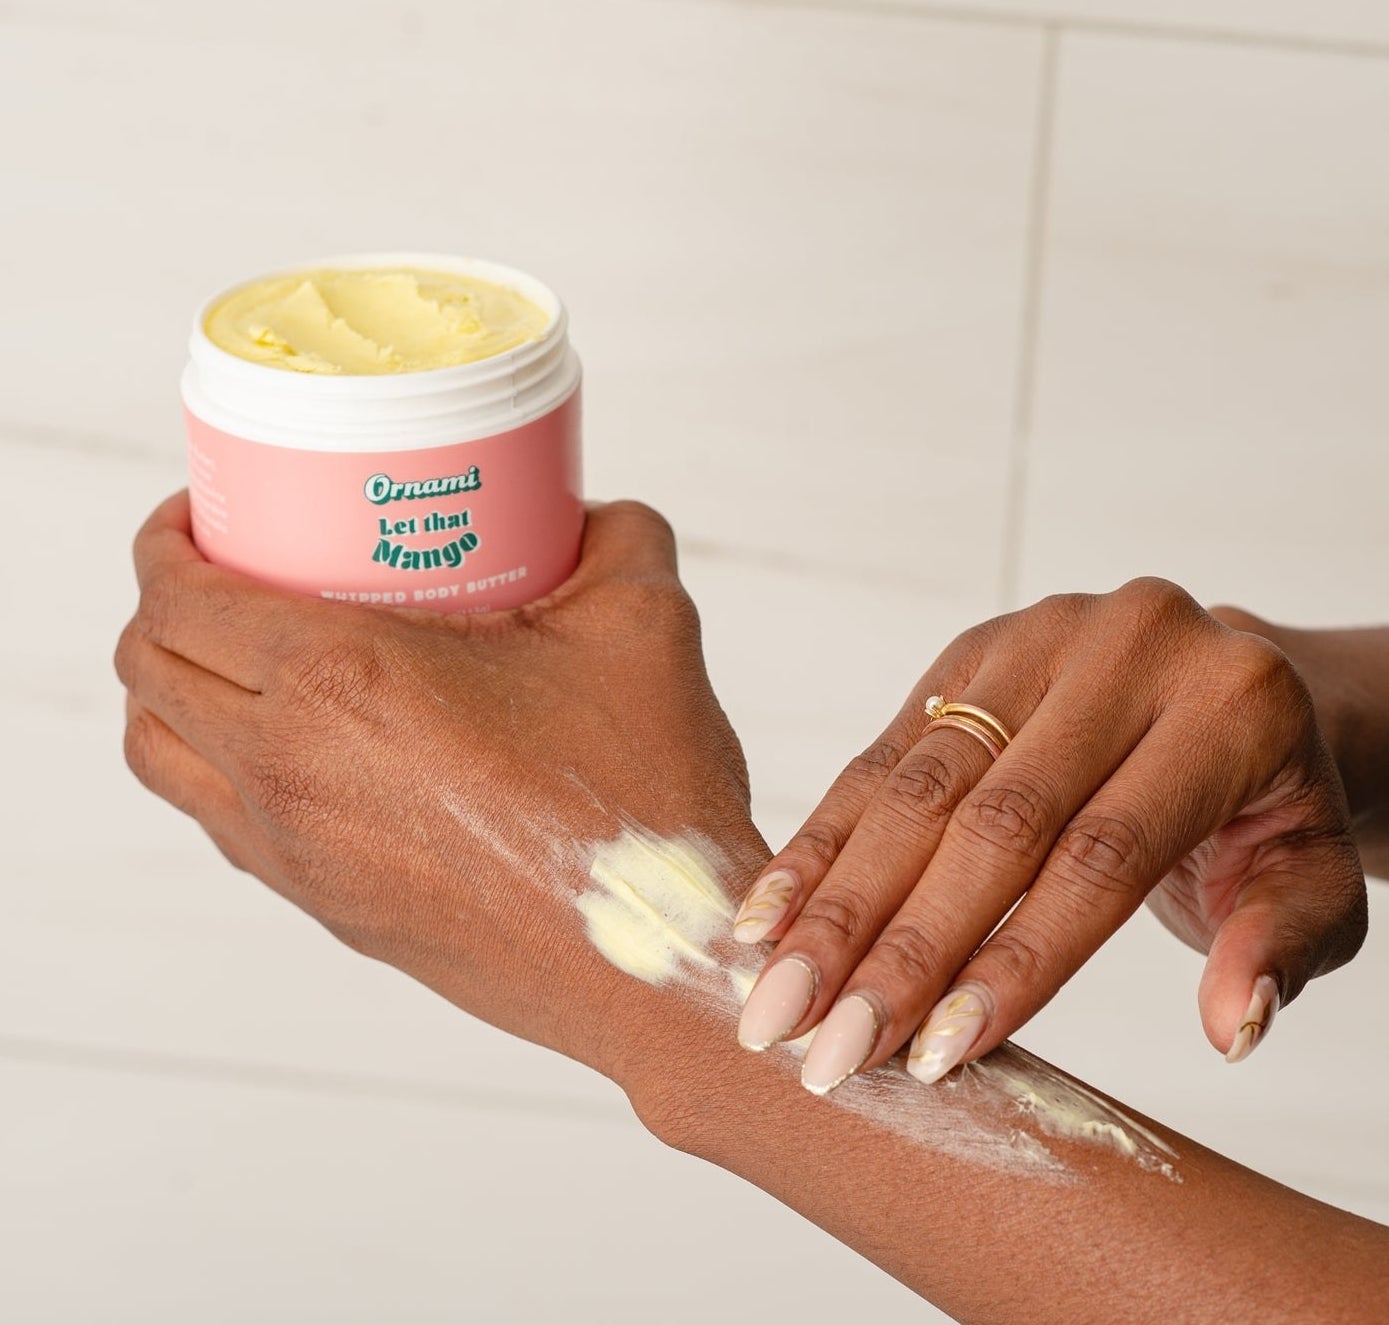 model applying the body butter to their arm